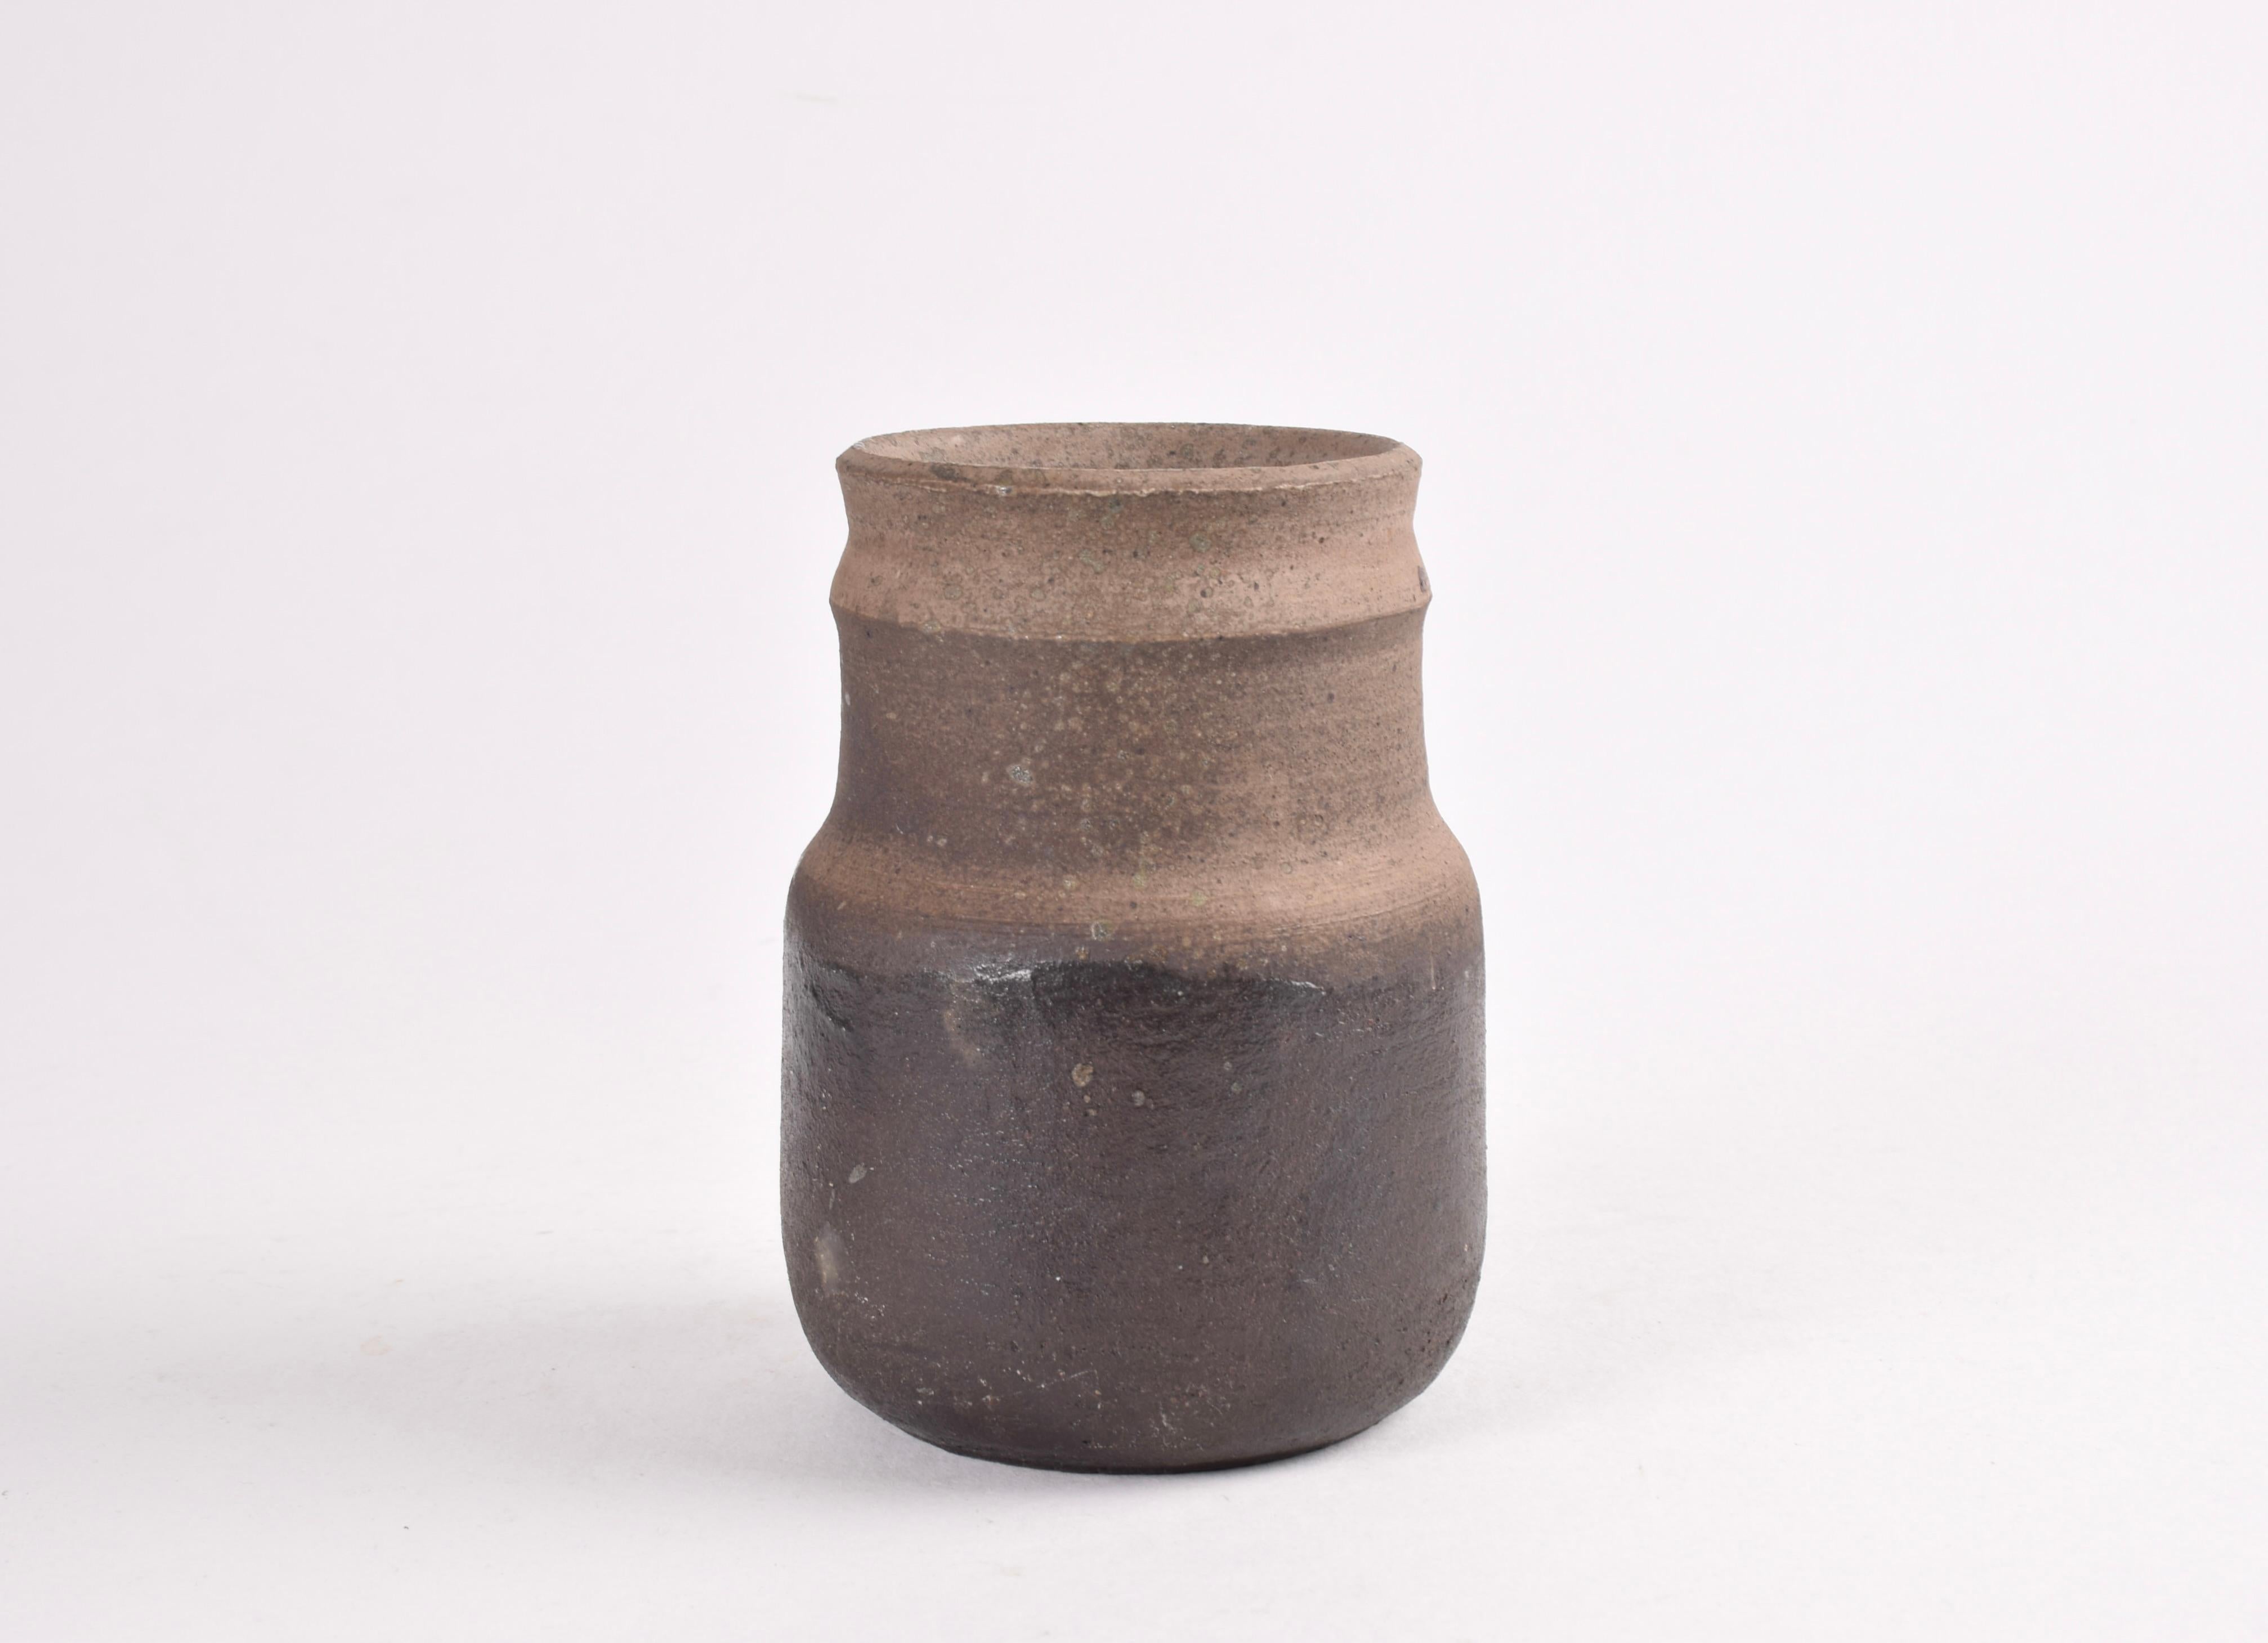 Mid-Century Modern Danish Modern Studio Ceramic Vase by Chris Moes Earth Tones with Speckles, 1970s For Sale